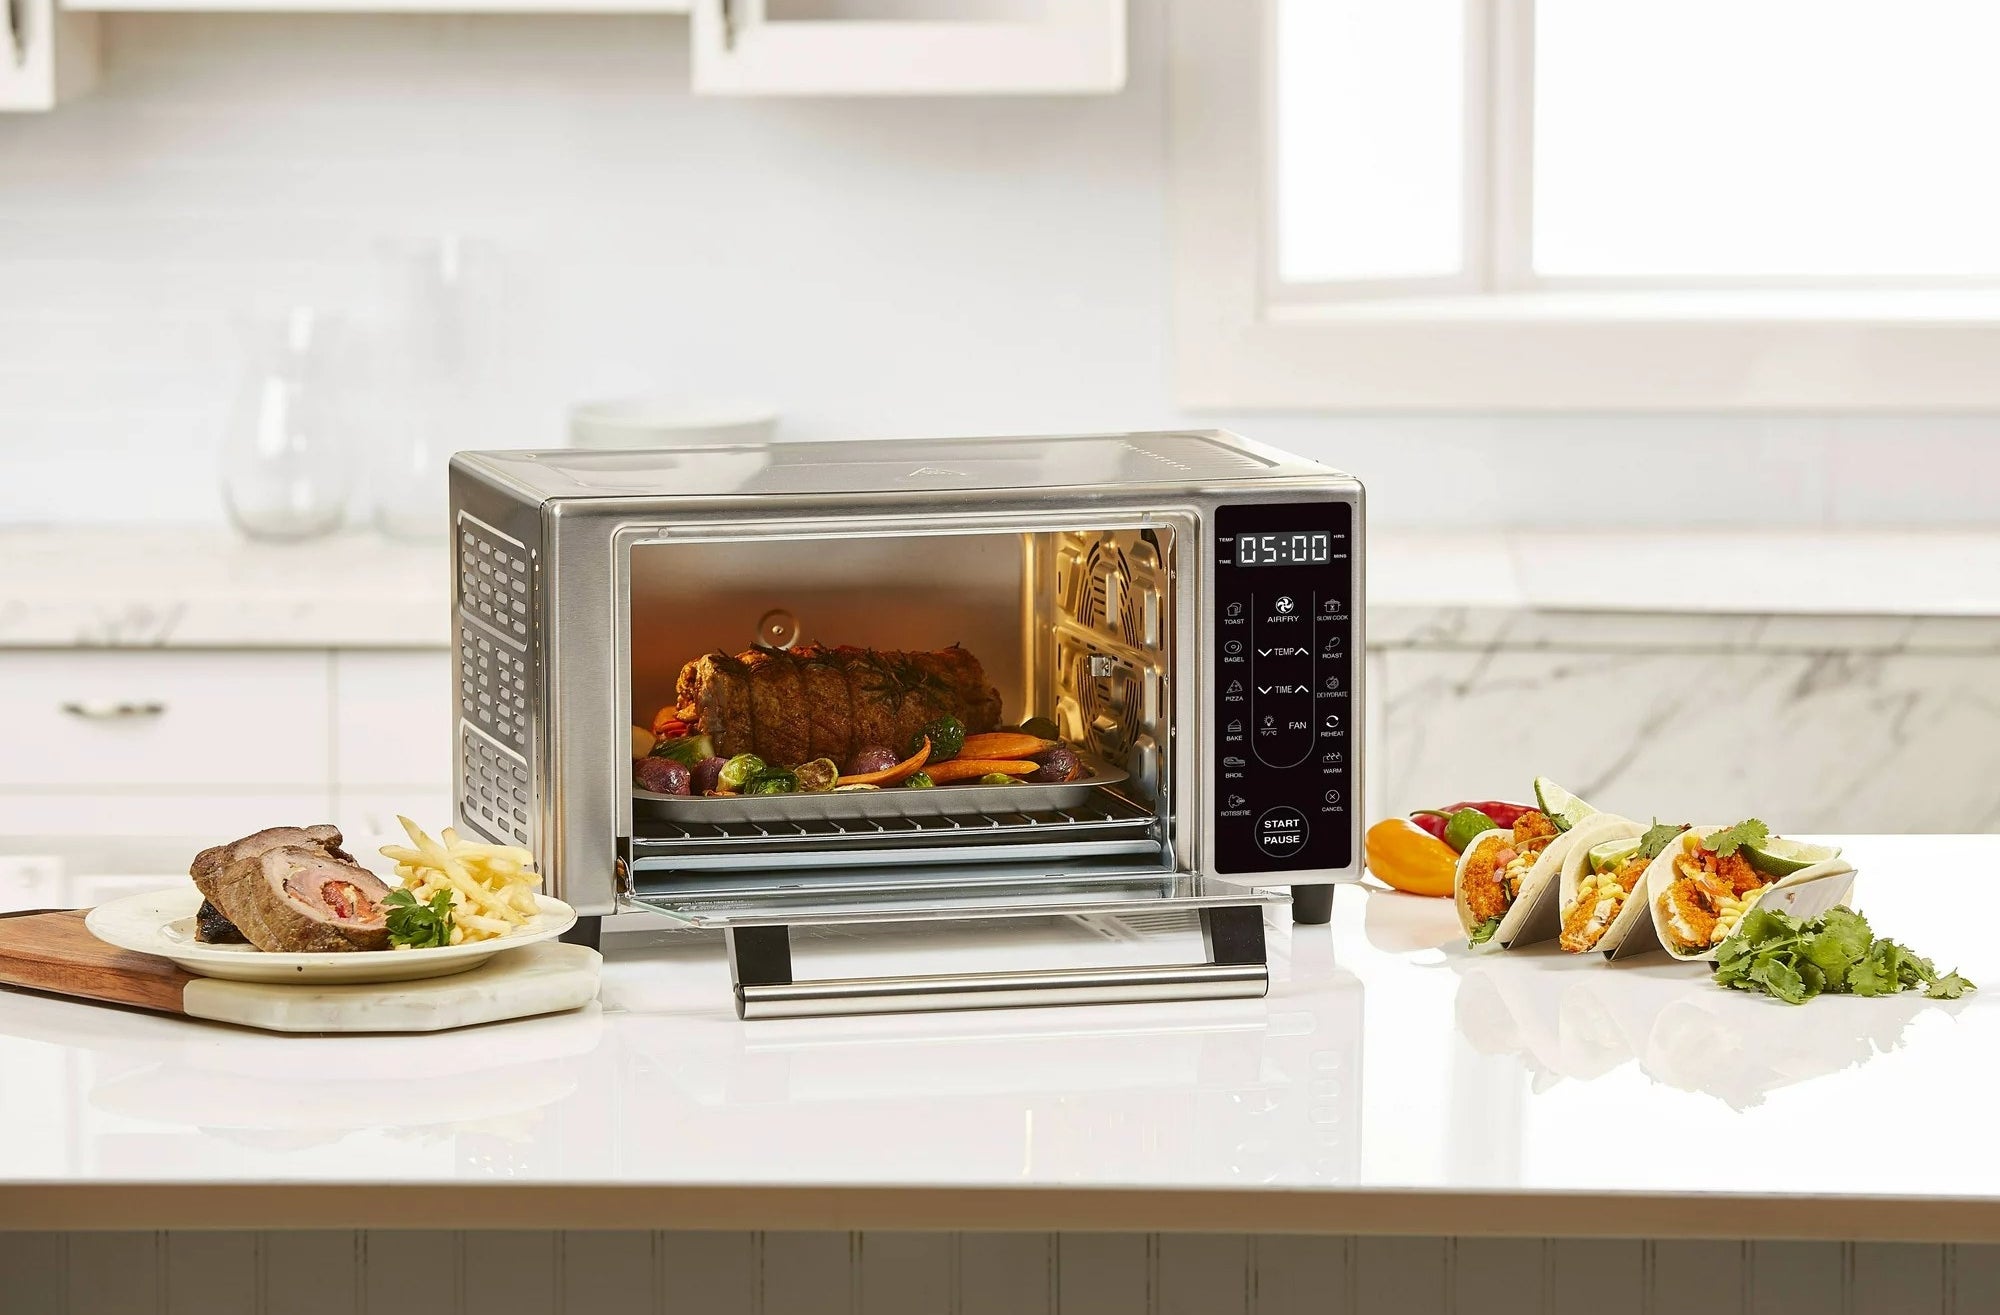 The air fryer/toaster oven